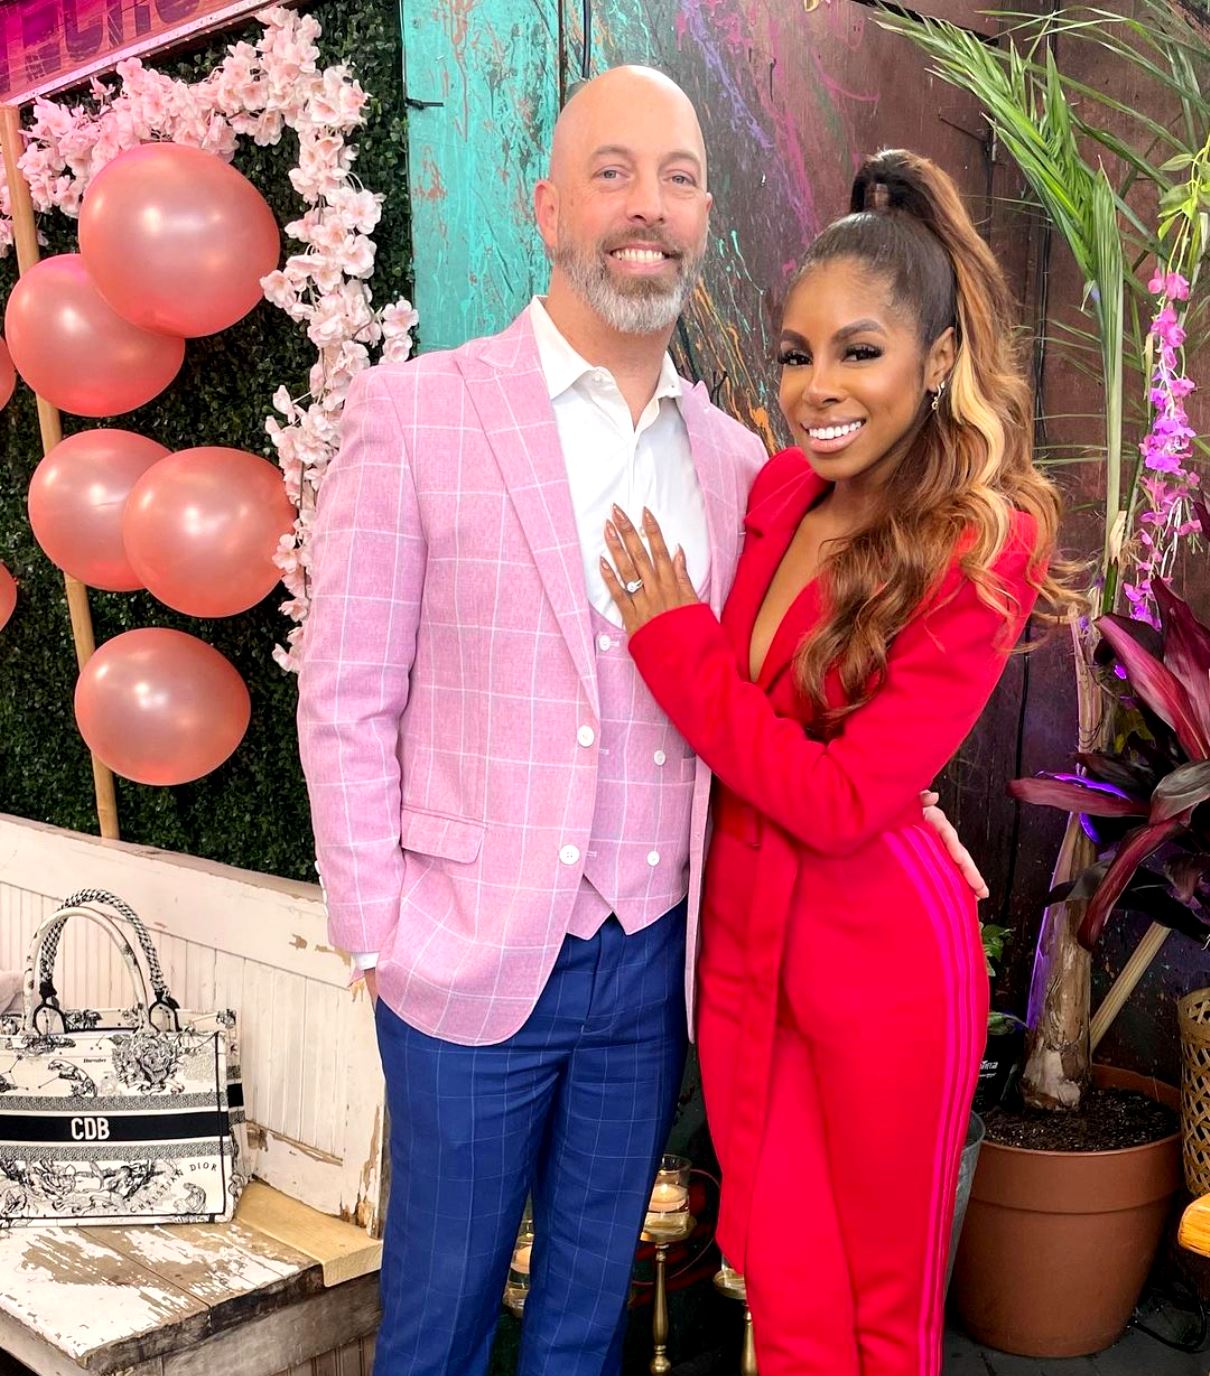 RHOP’s Chris Bassett’s Alleged Mistress Admits to Lying About Affair, Says She “Never” Actually Met Him, as Candiace Speaks and Fans Weigh in